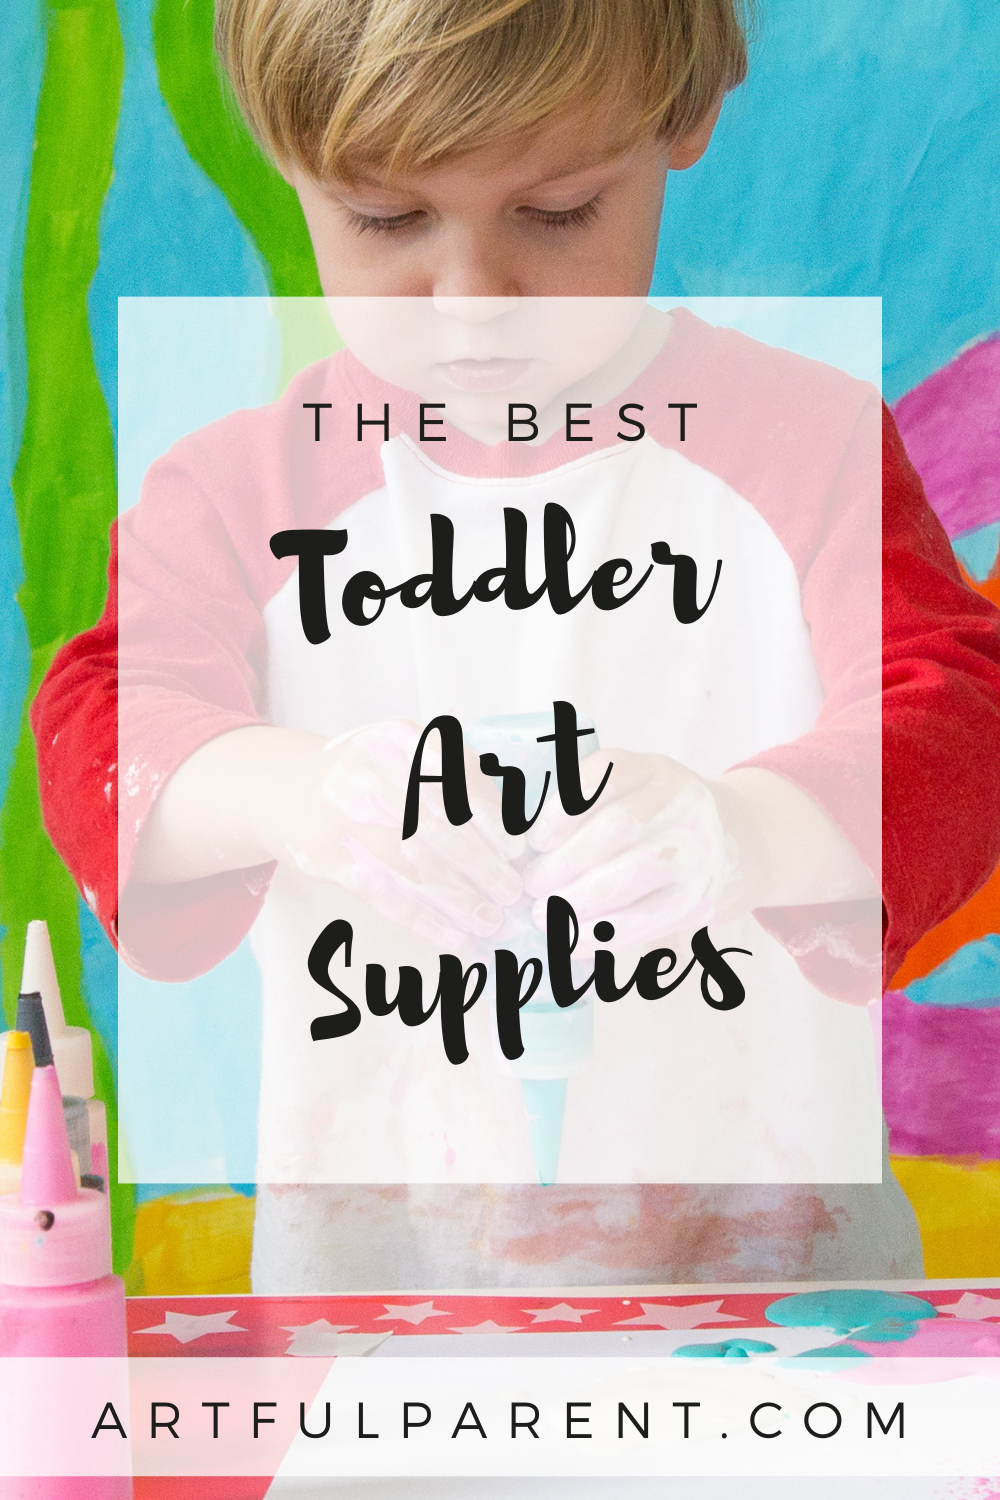 The Best Art Supplies for Toddlers